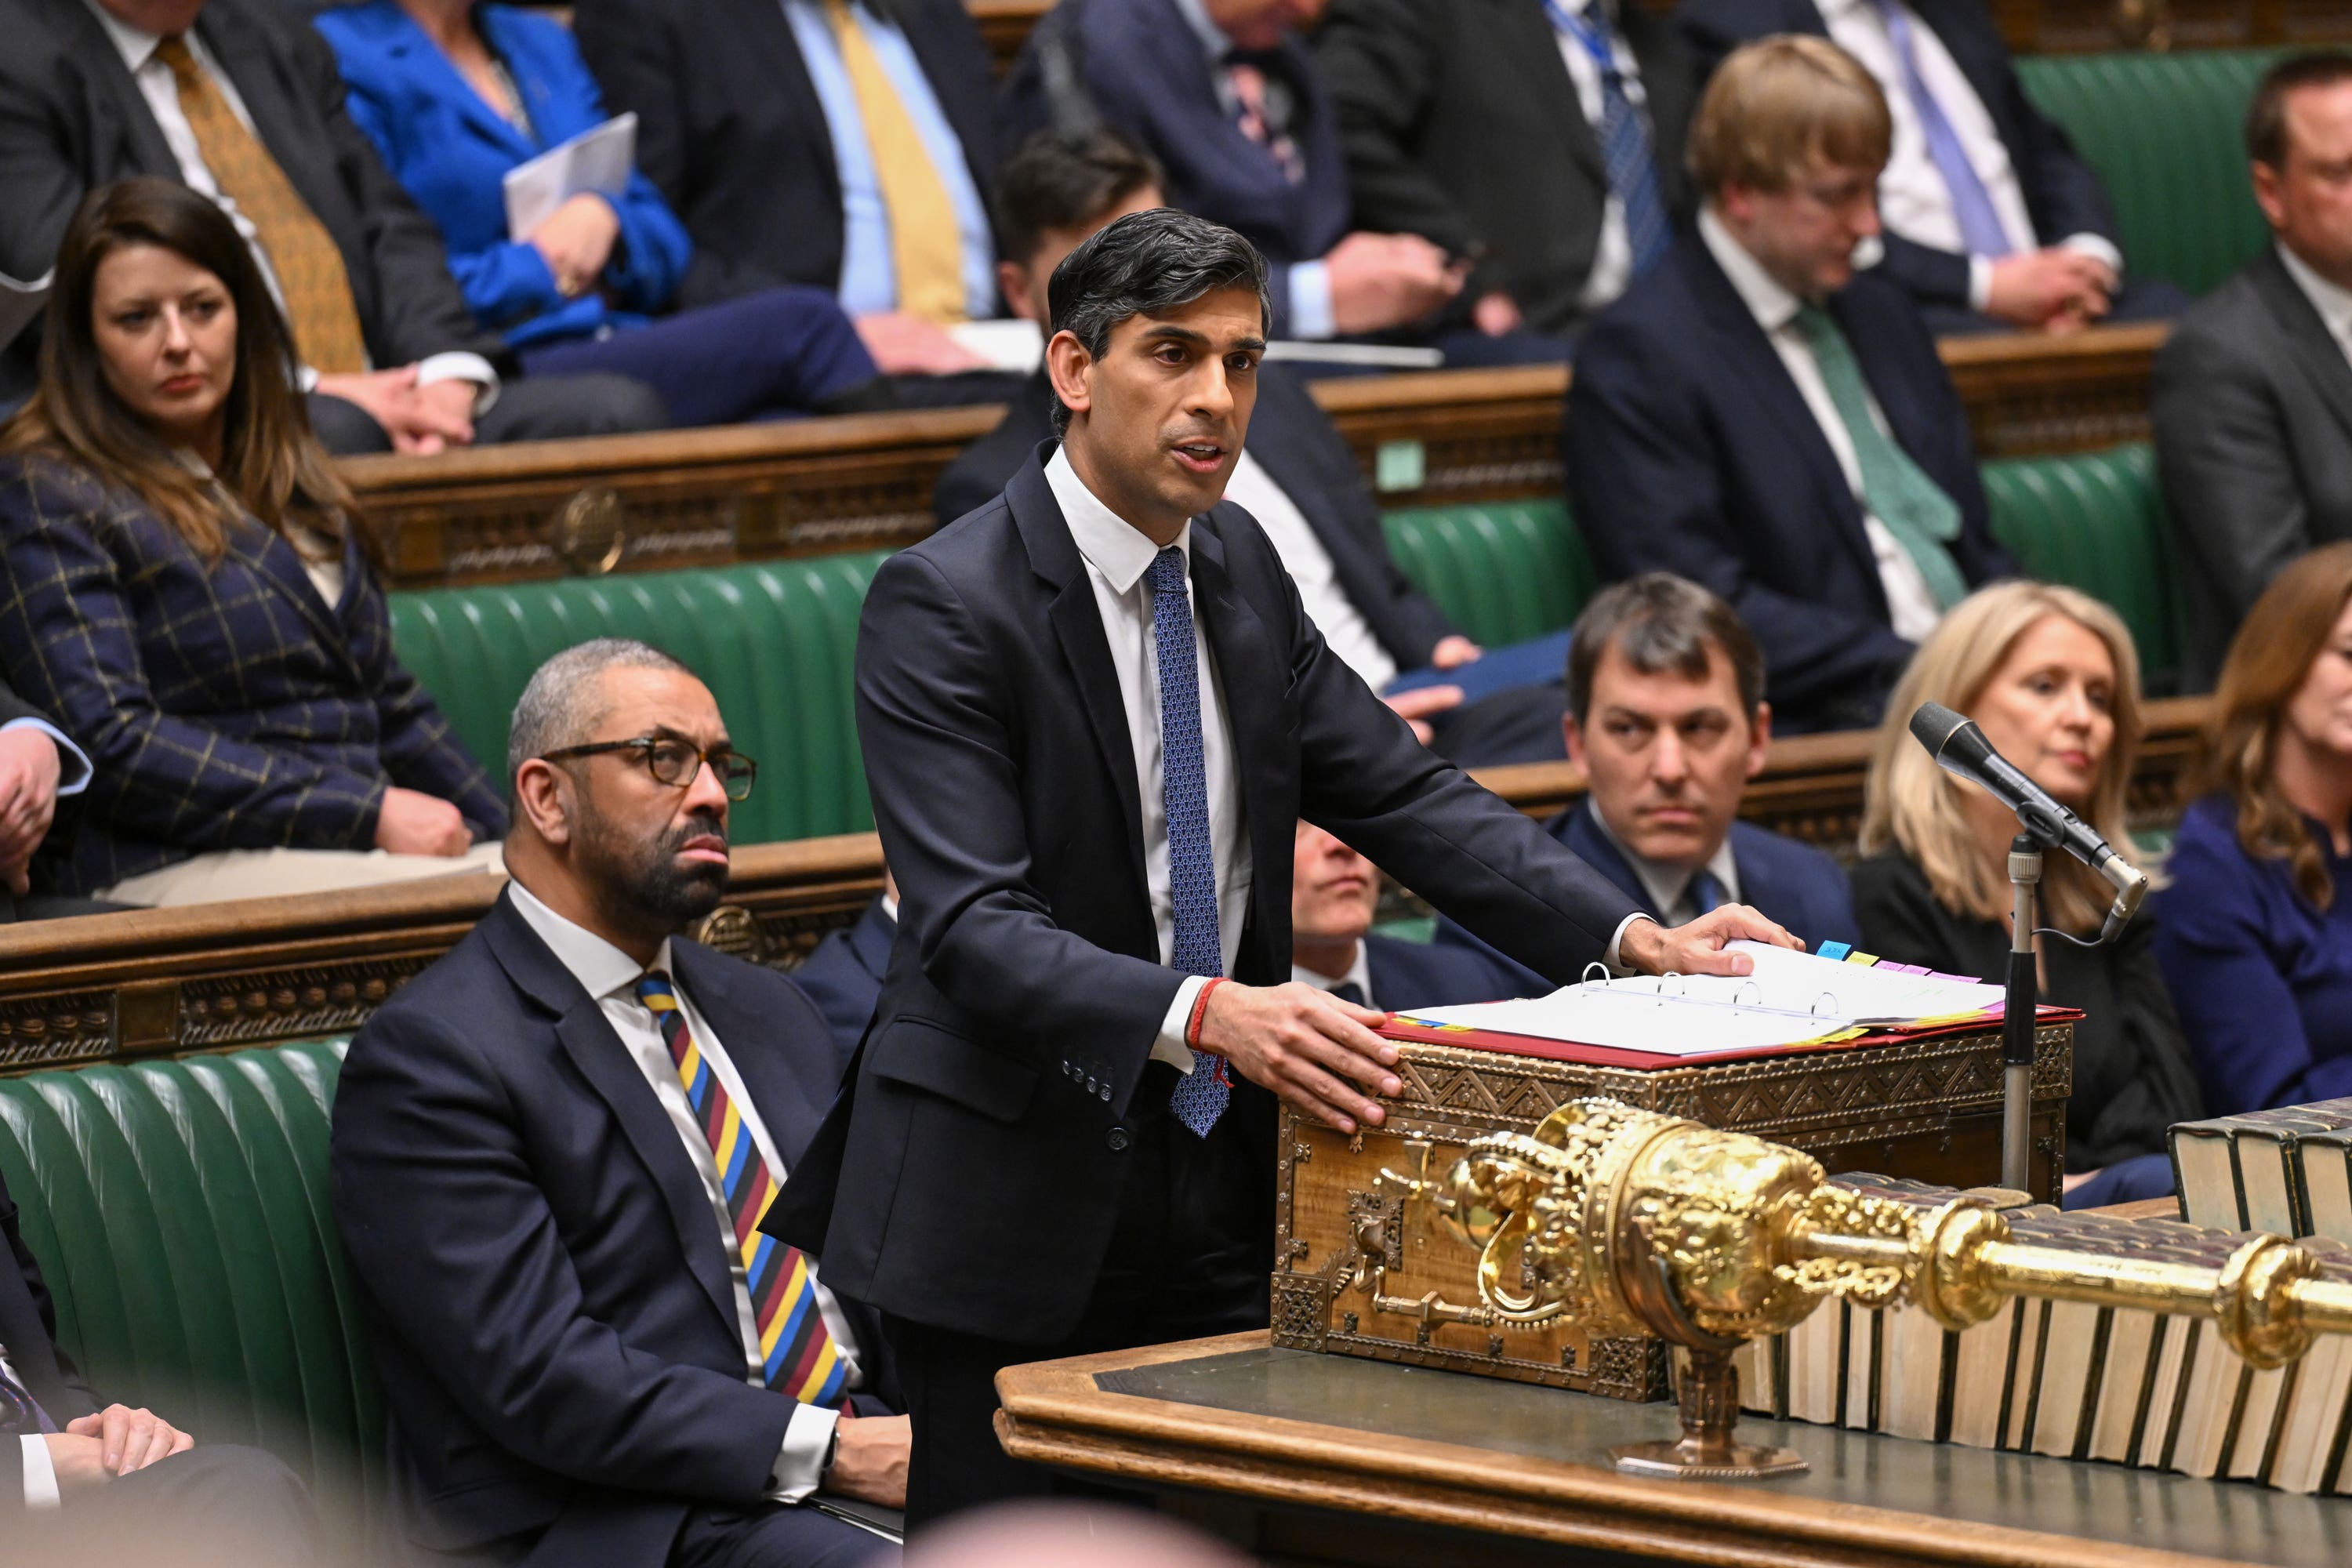 Our prime minister relied on Labour votes to see off opponents on his own benches